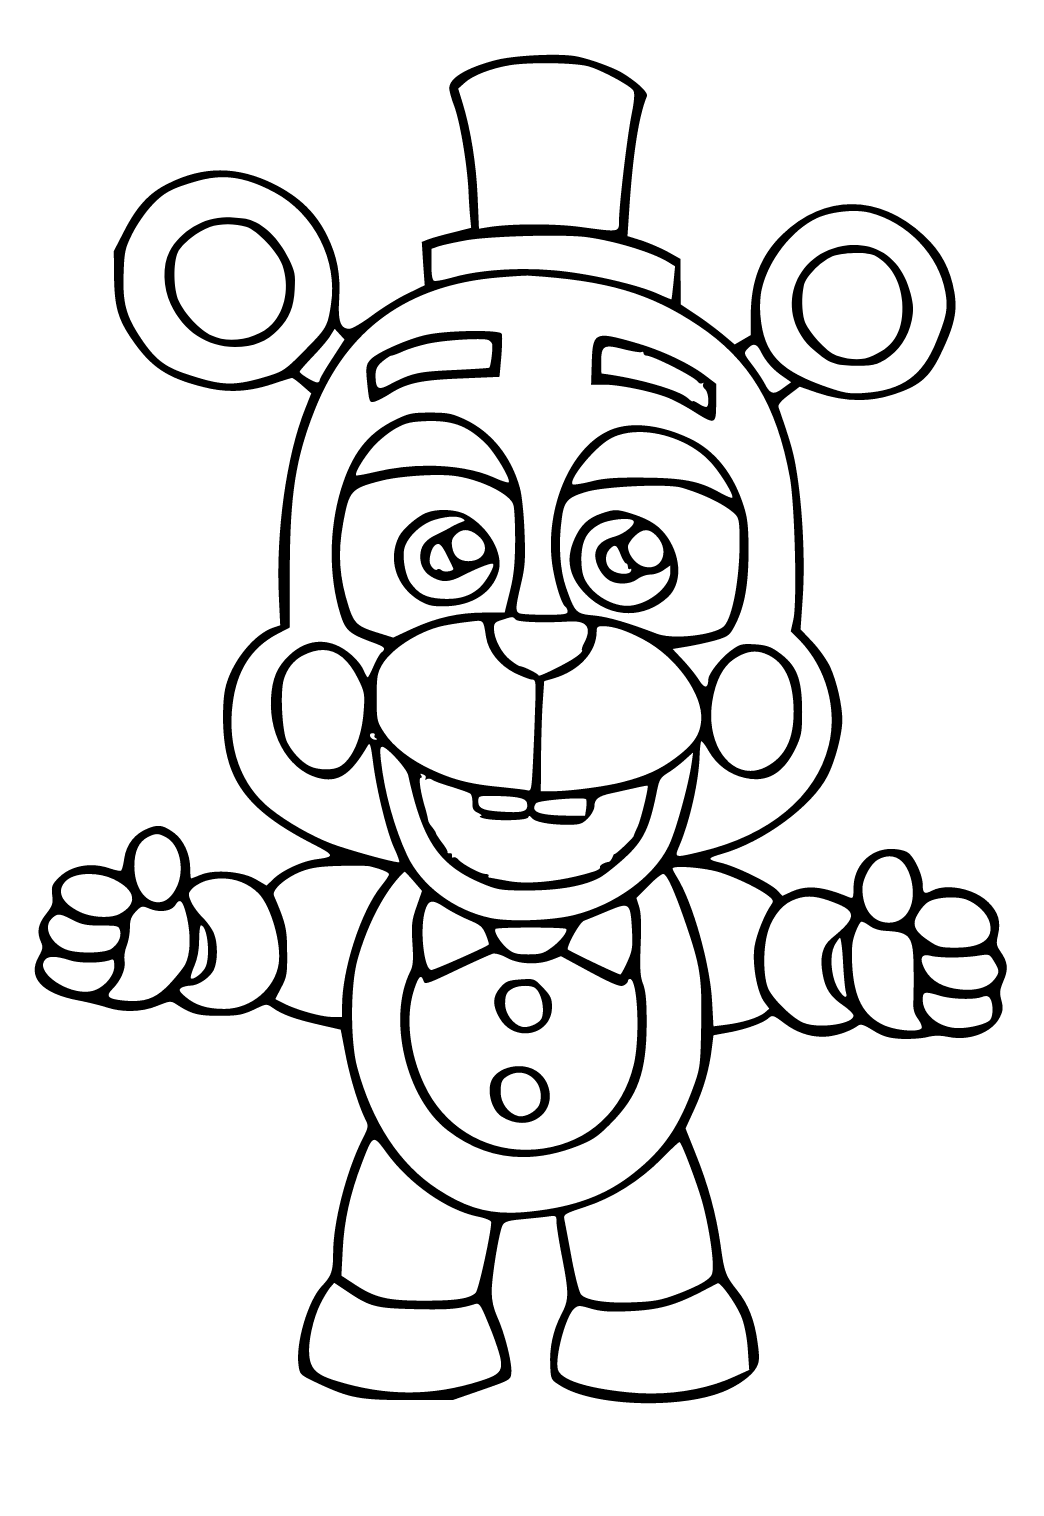 Free printable fnaf cute coloring page for adults and kids